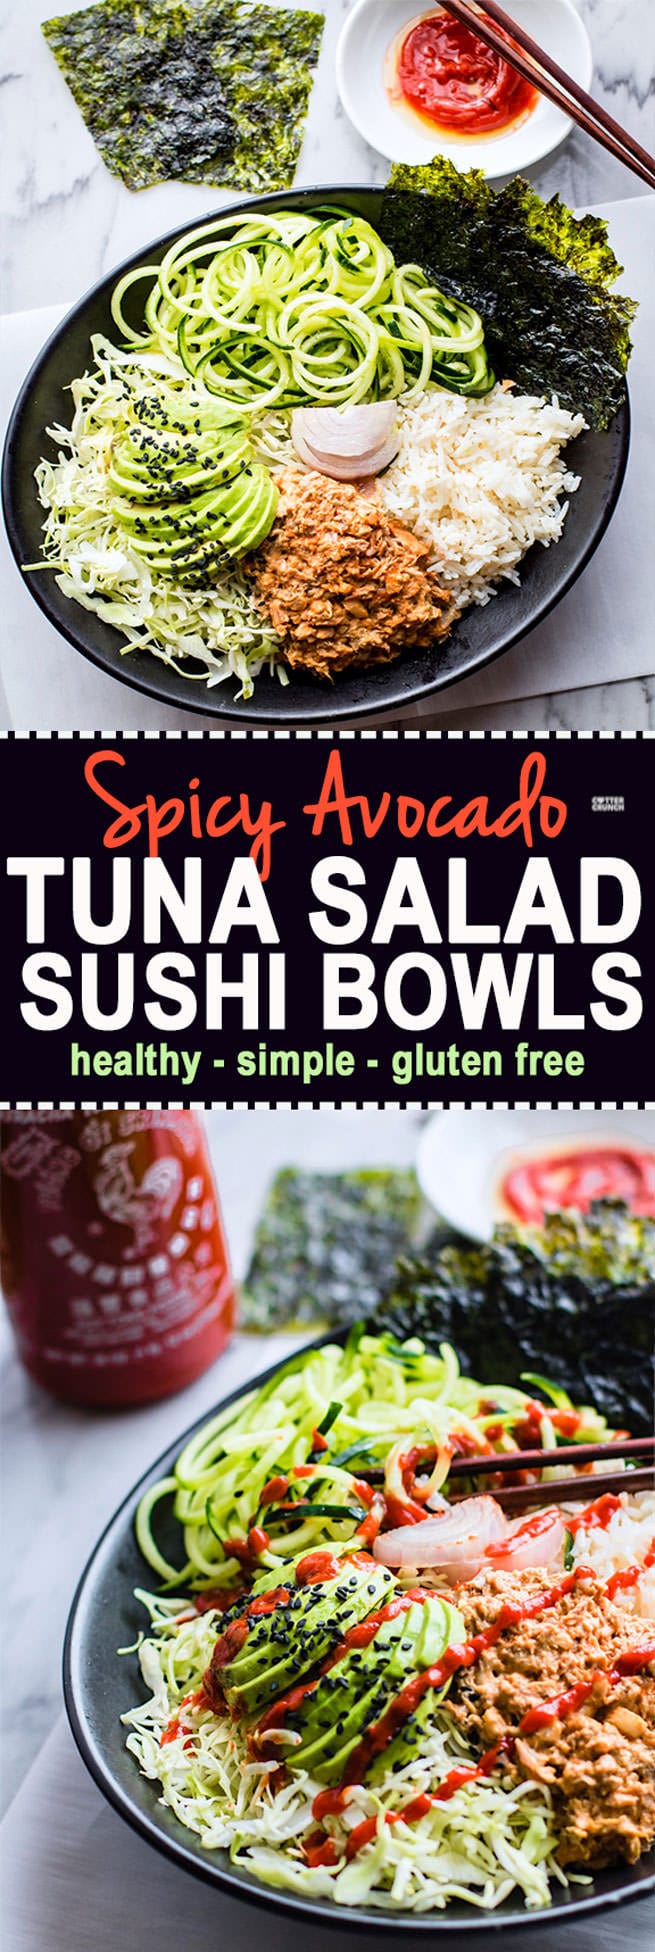 Spicy avocado tuna salad sushi bowls. A protein packed gluten free tuna salad mixed with healthy sushi ingredients, then tossed all in a bowl. #paleo friendly @cottercrunch